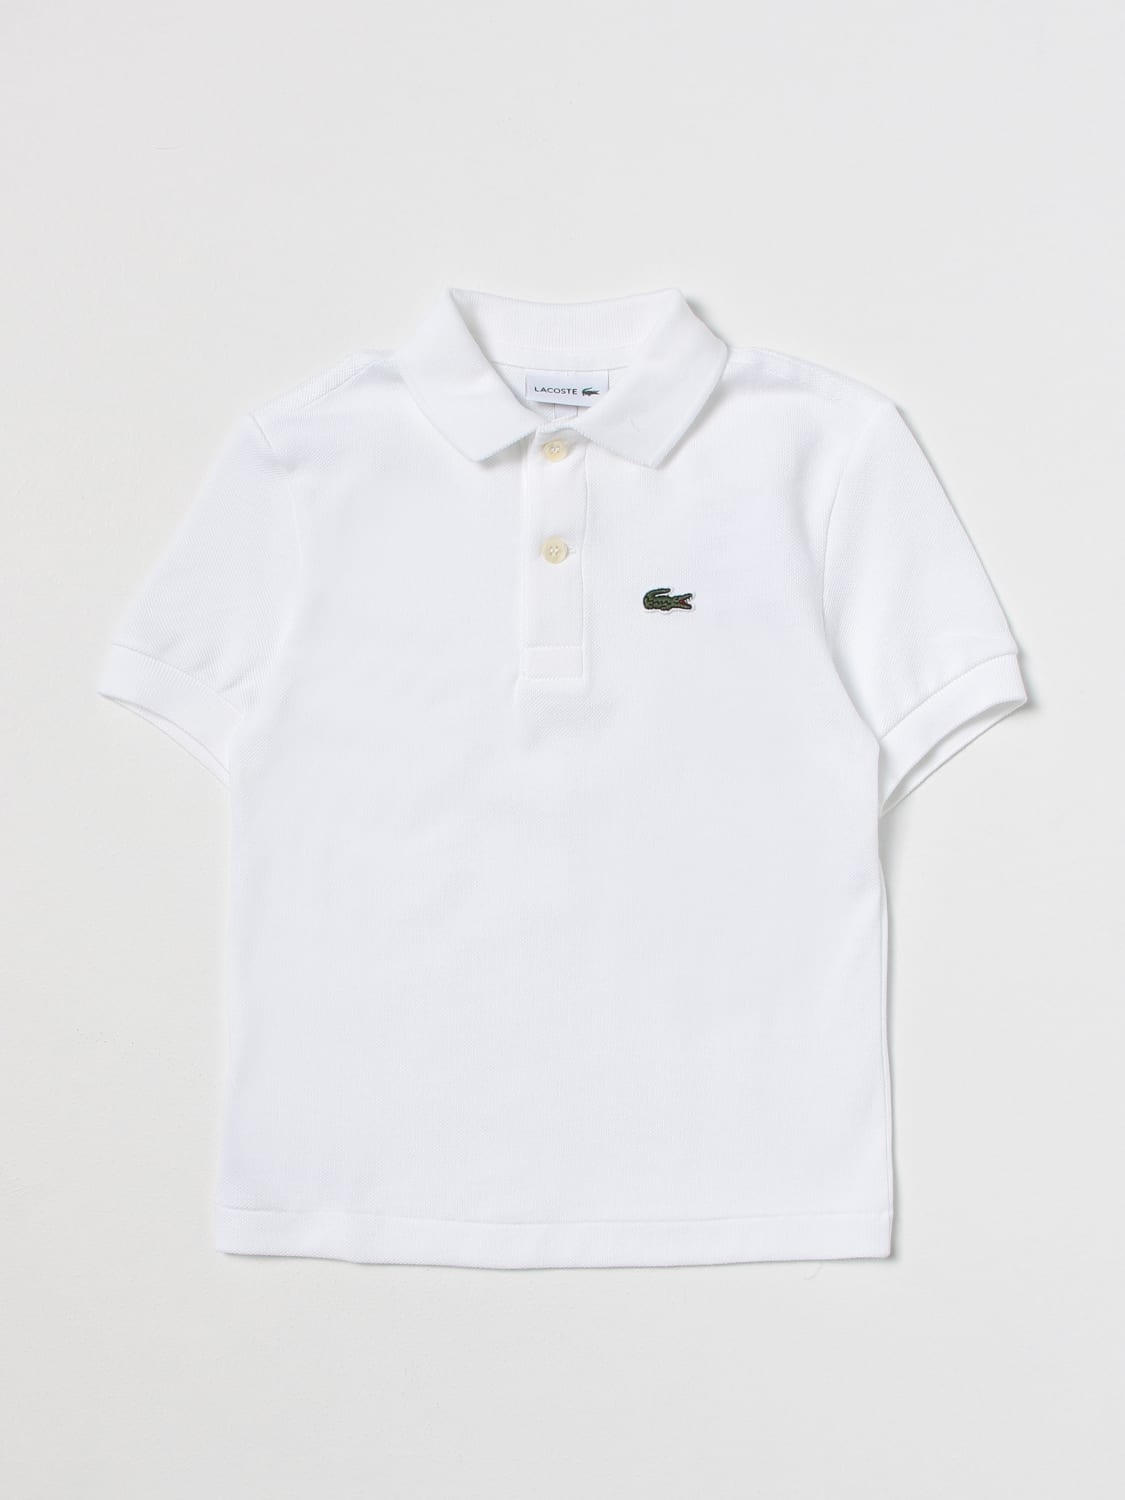 LACOSTE: shirt for boys - White Lacoste polo shirt PJ2909 on